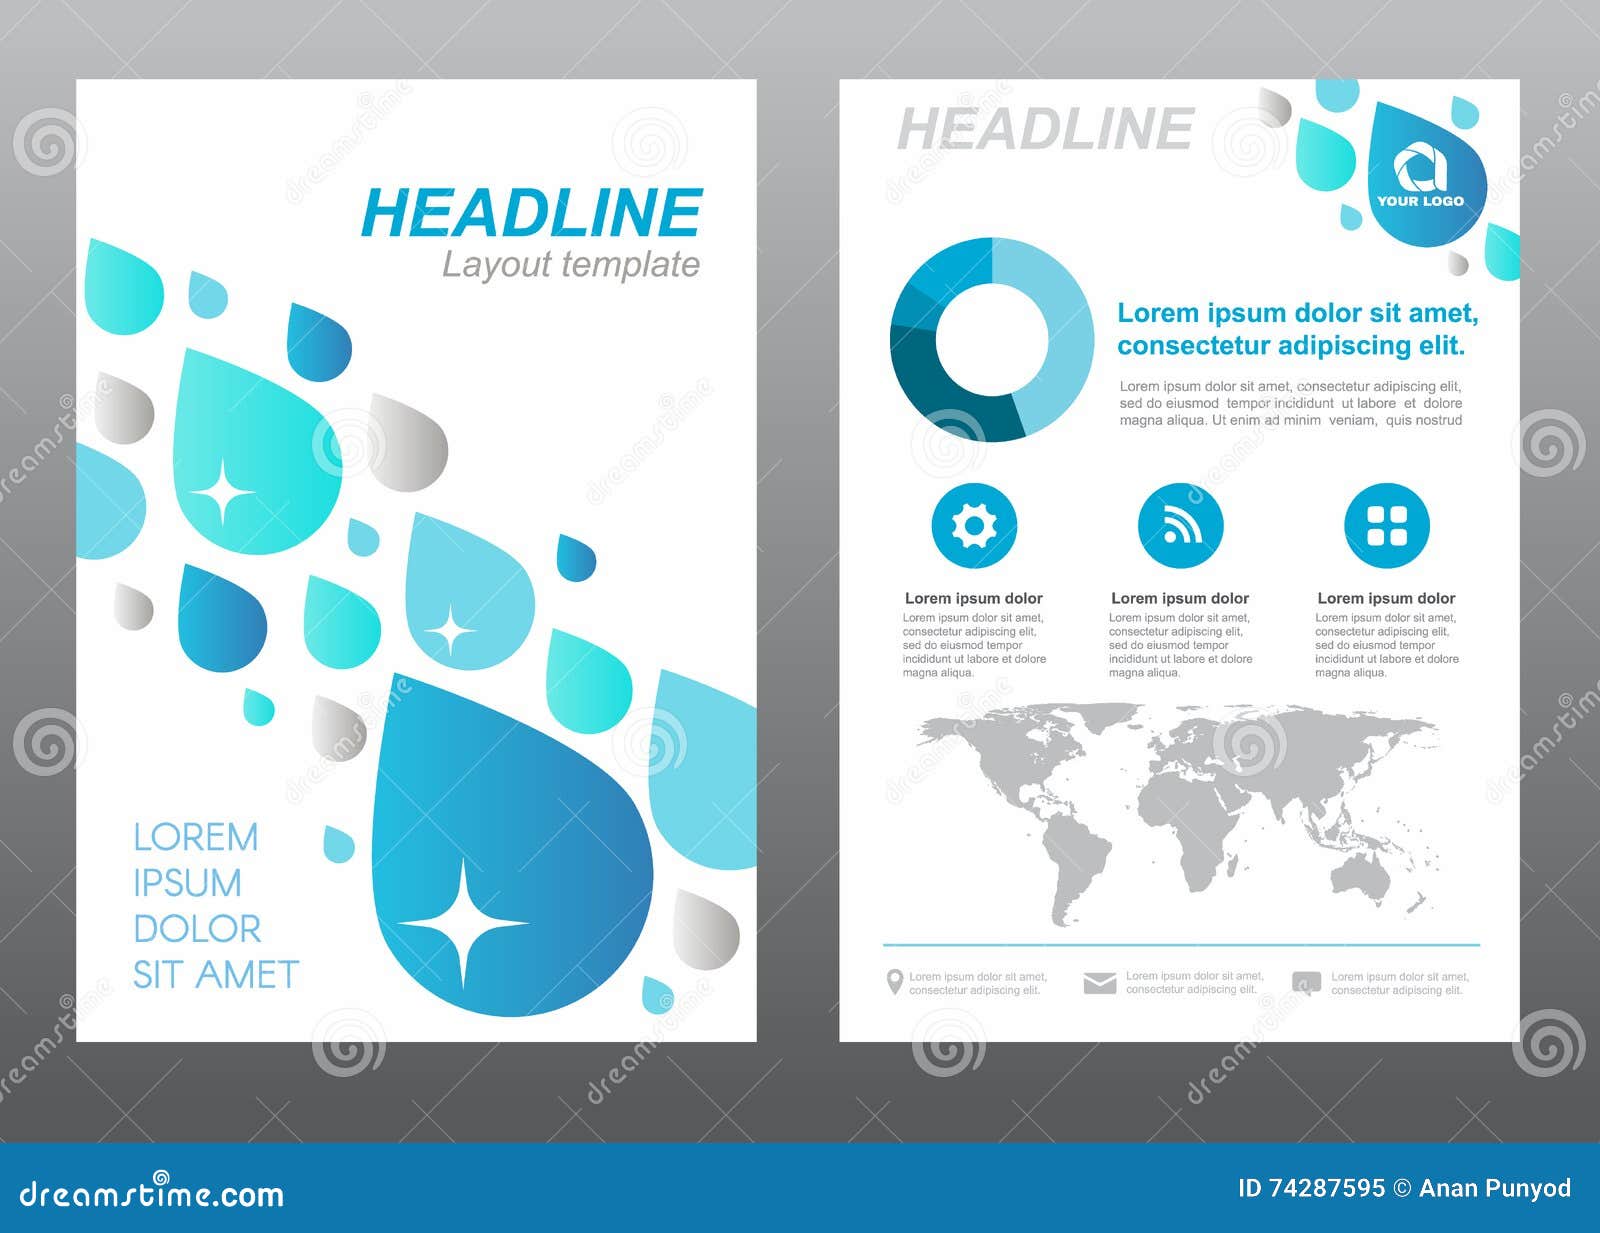 Flyer Template Latex Throughout Quarter Page Flyer Template